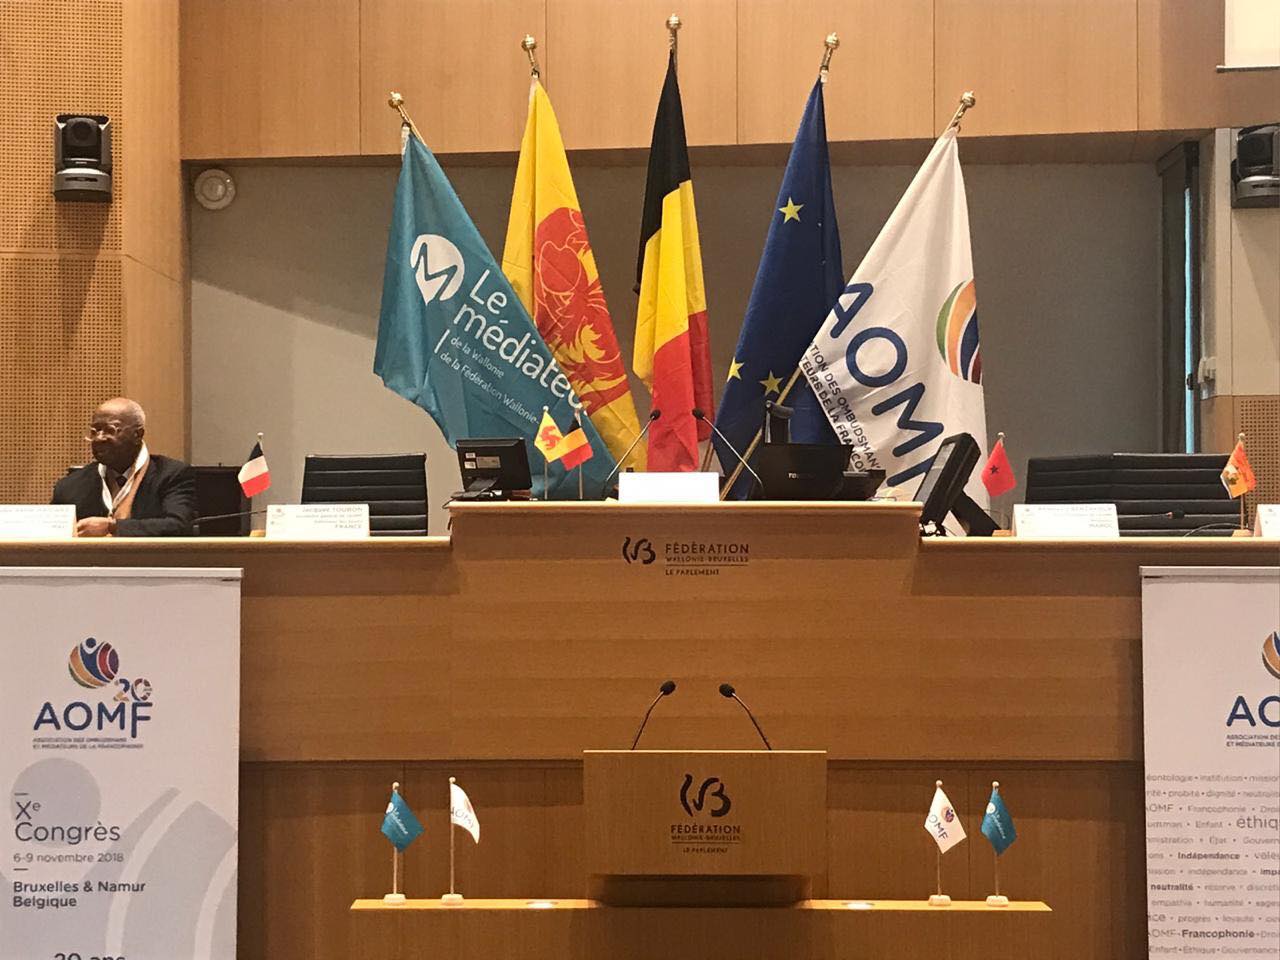 The Ombudsperson Of Albania Takes Part On The Tenth Congress Of The Aomf